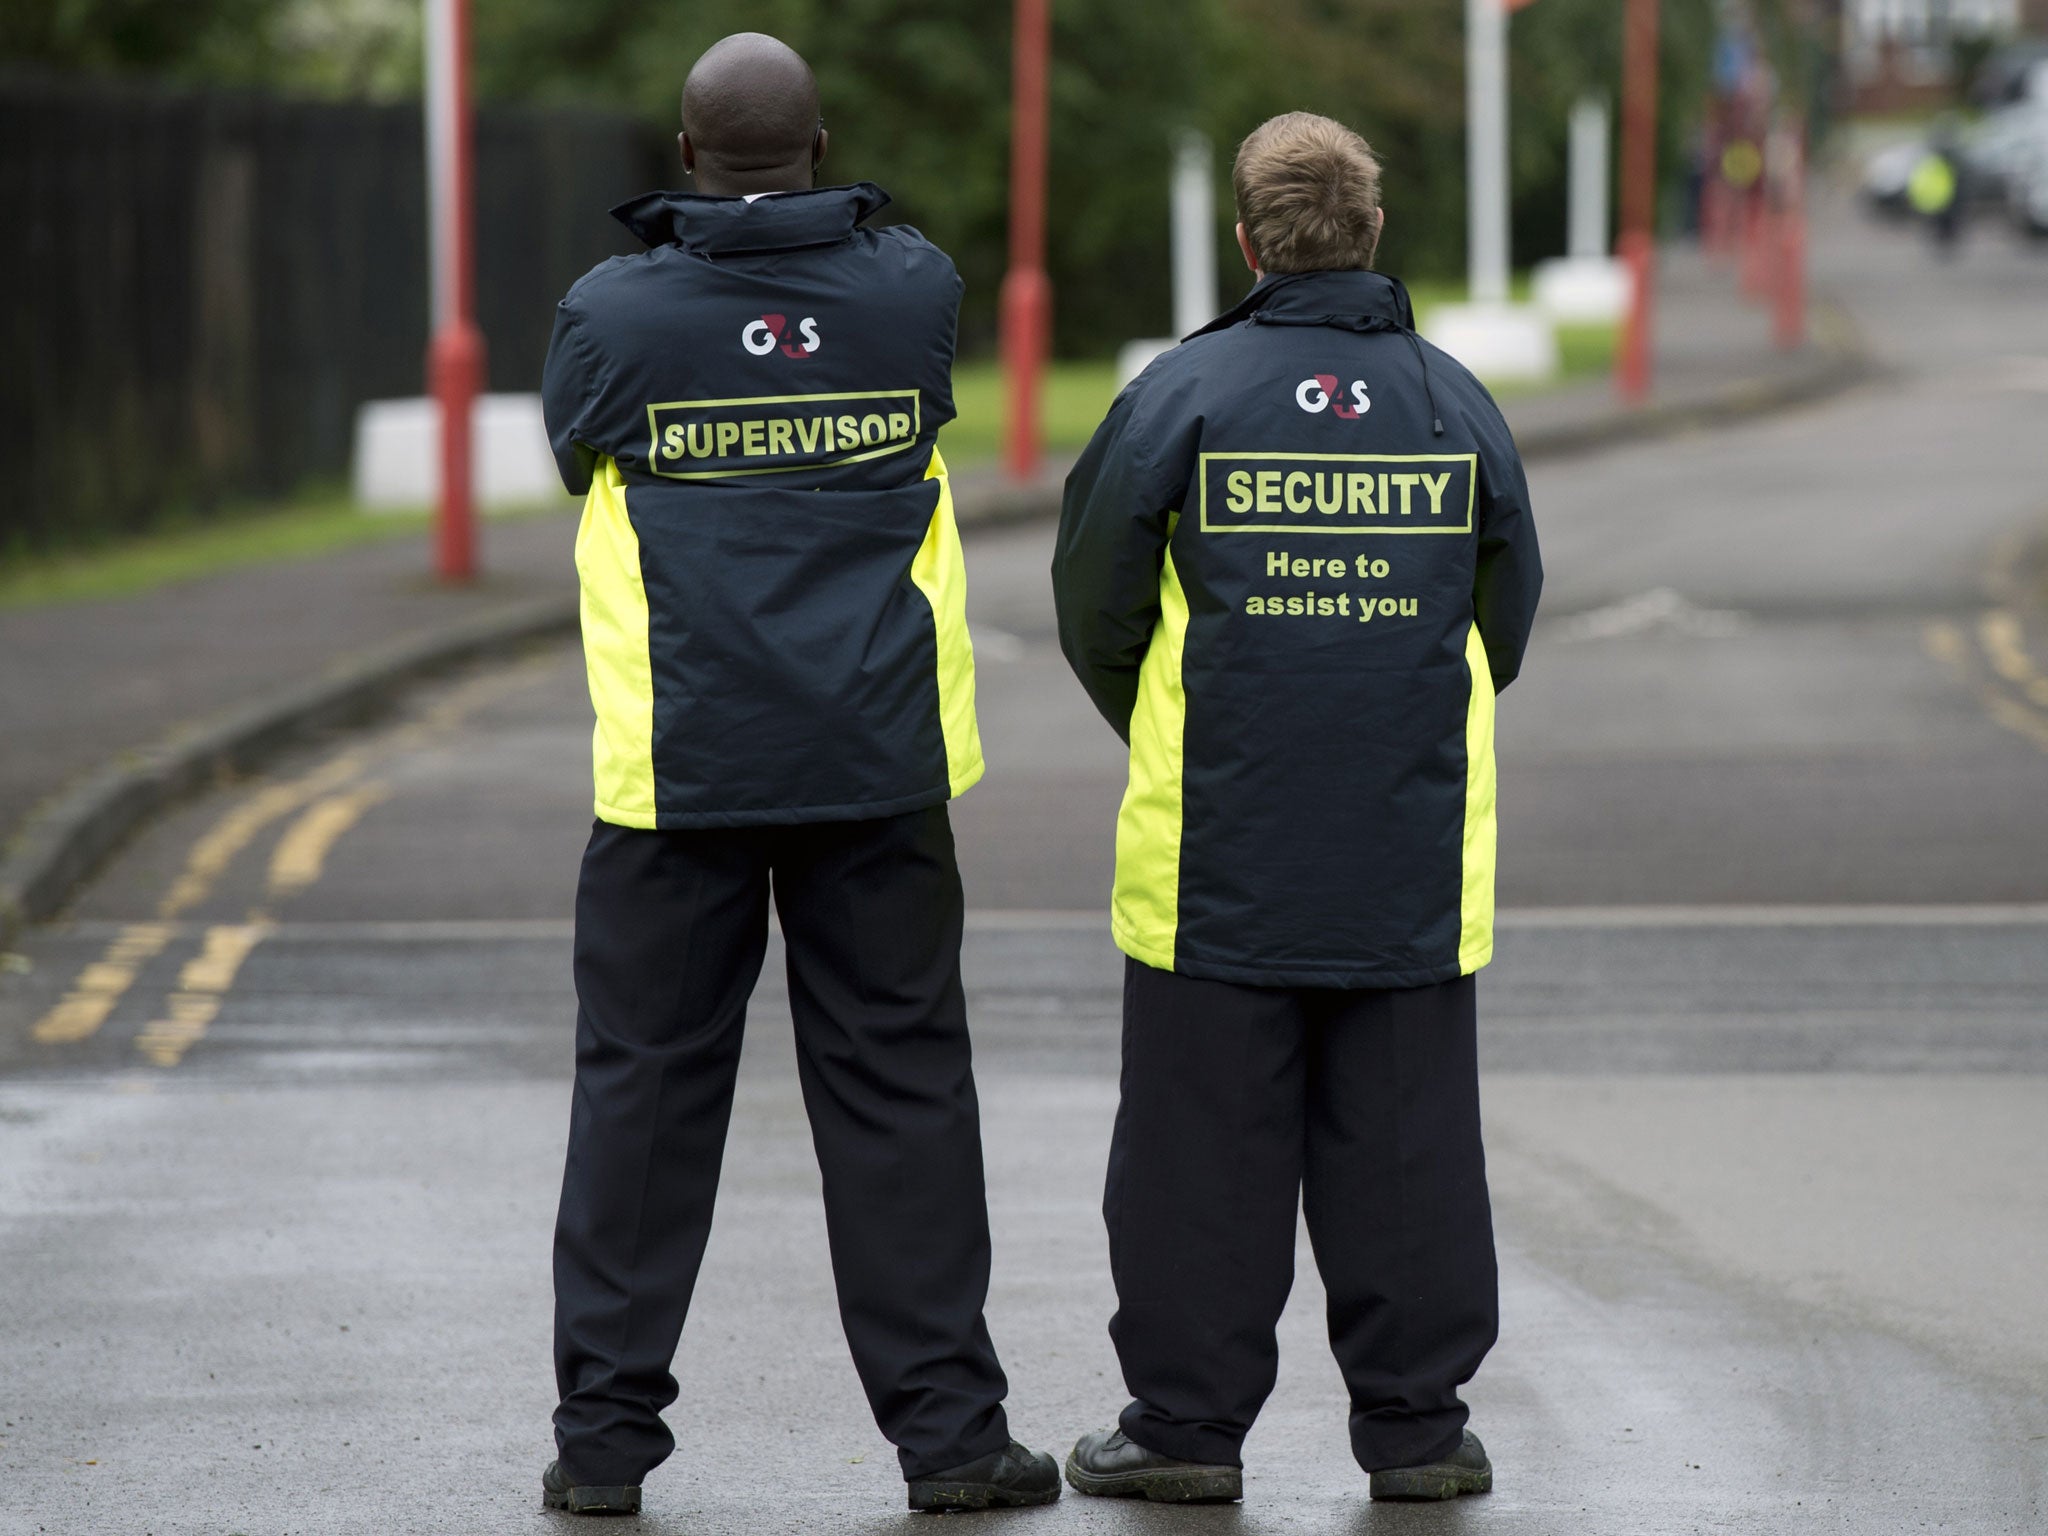 G4S was found to have overcharged taxpayers to monitor tags that didn't exist